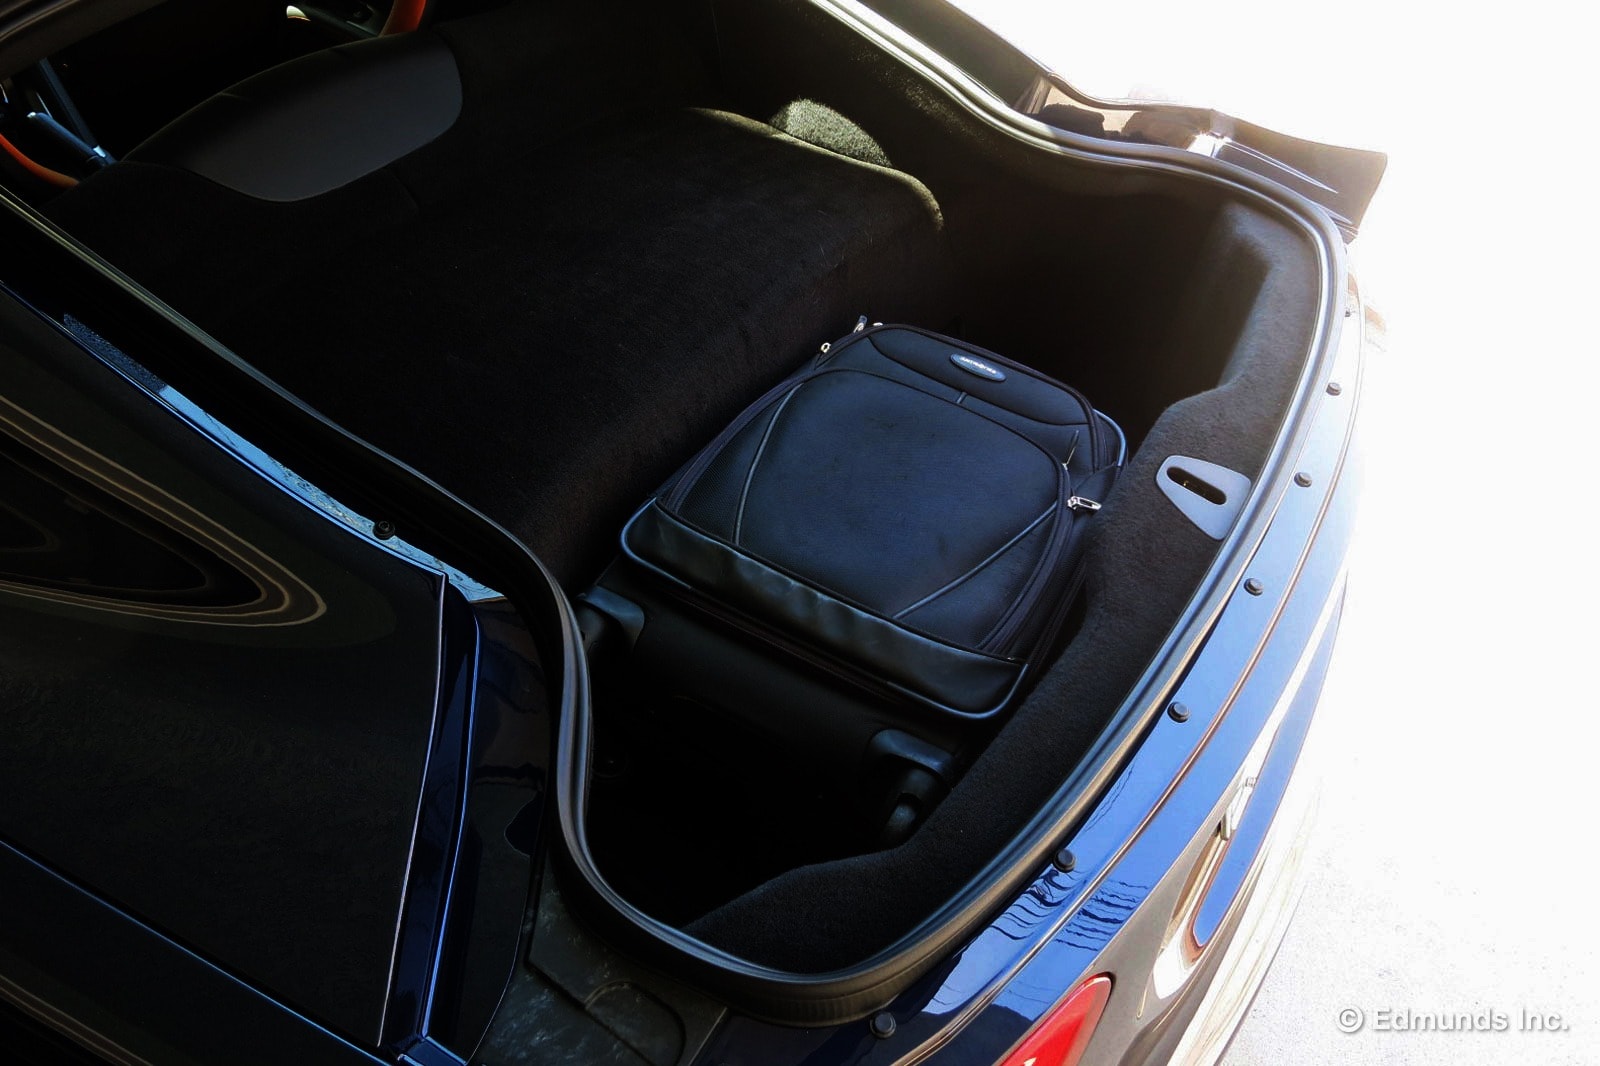 Unleashing the secrets of opening a Can-Am Spyder trunk without a key